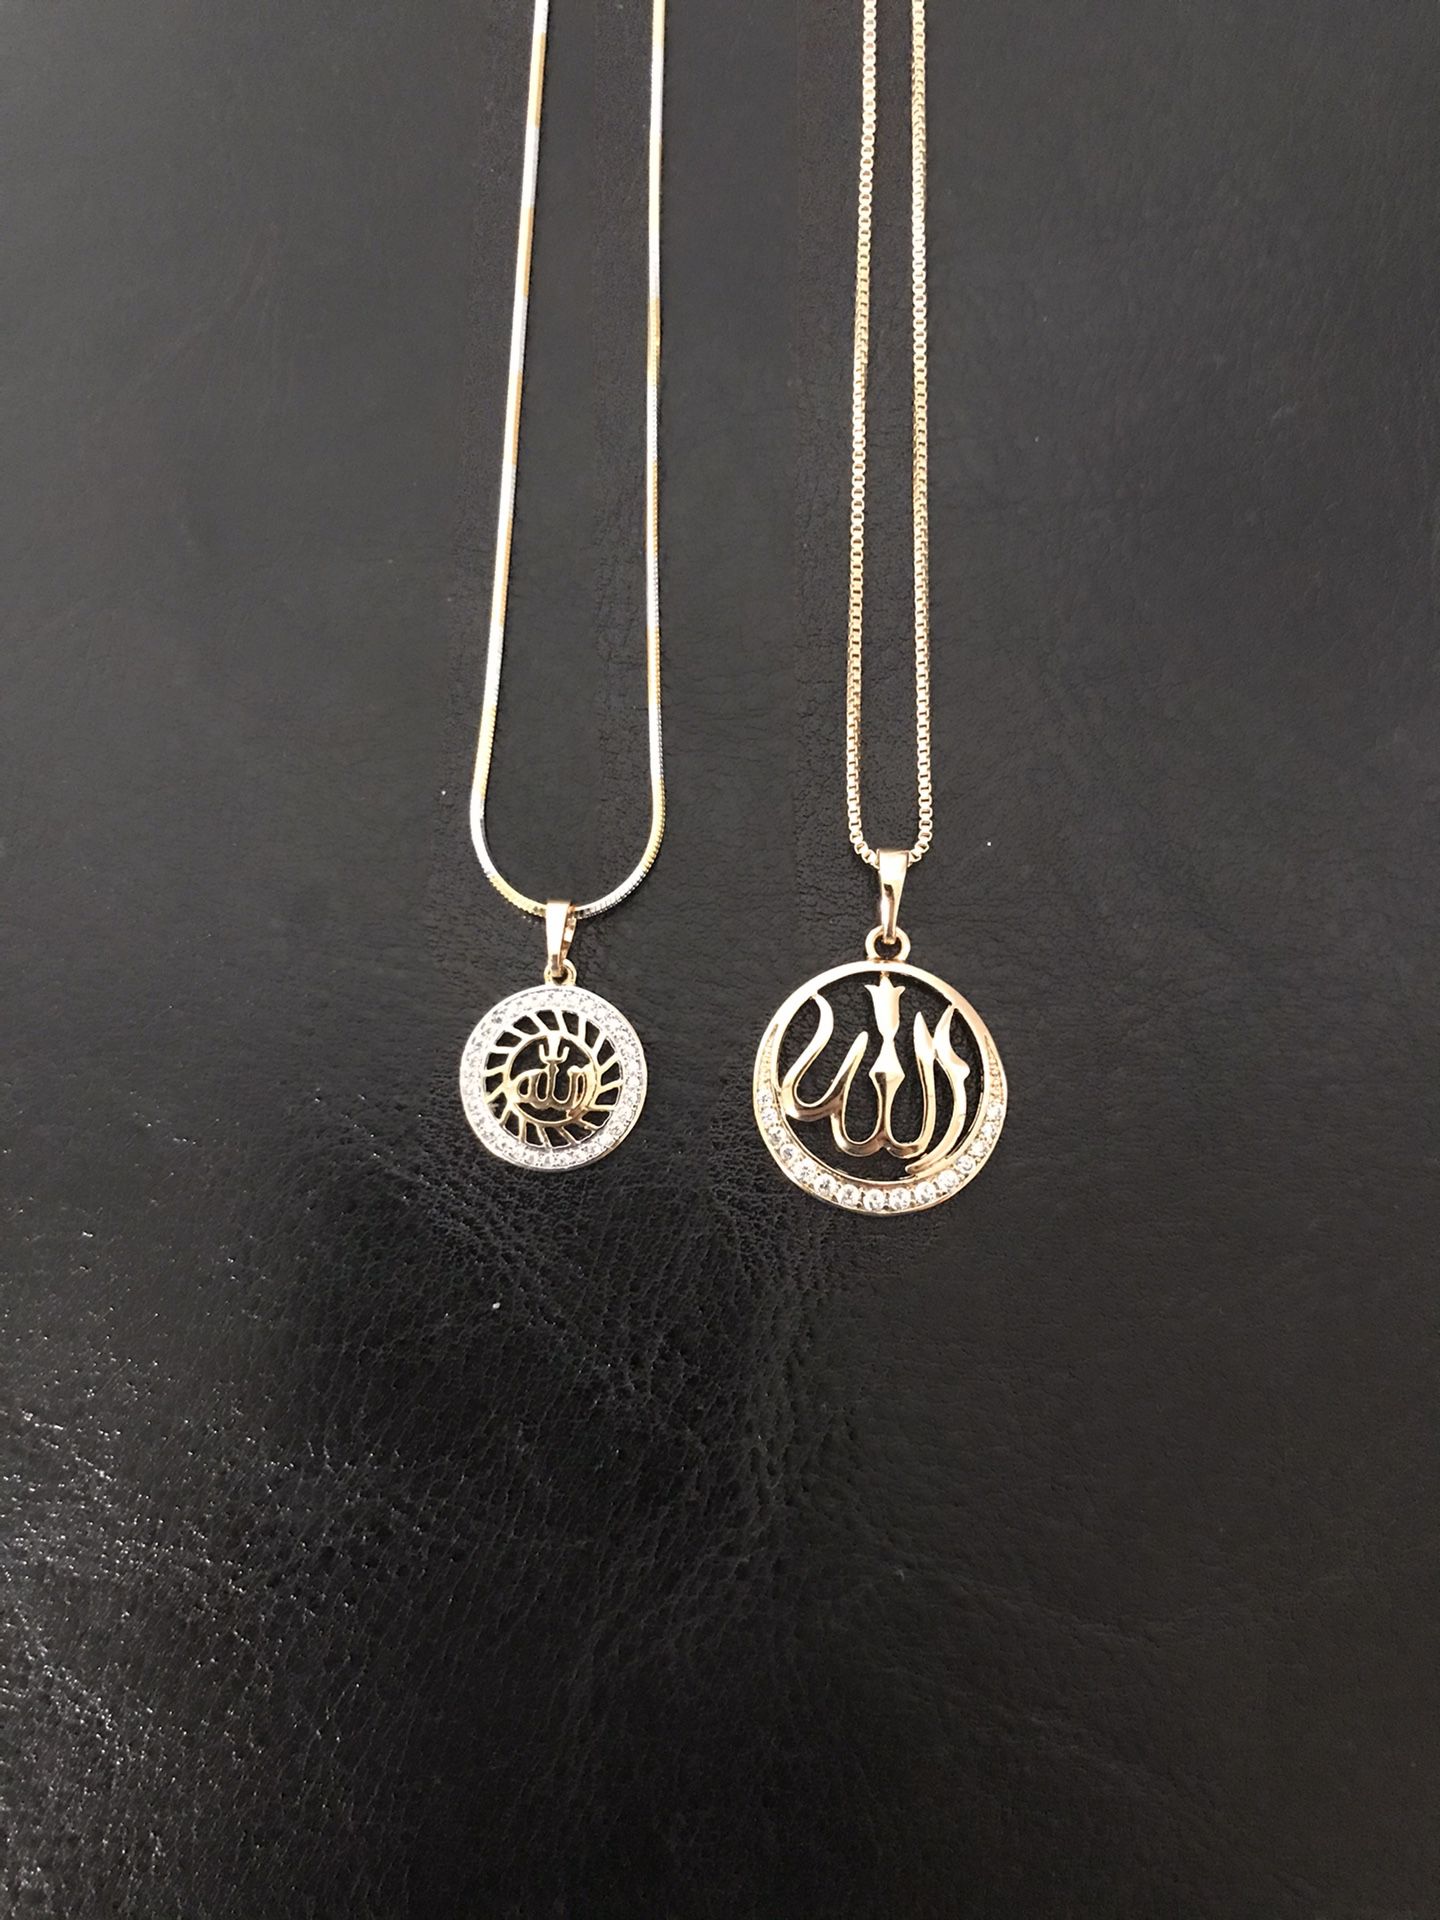 Gold plated allah pendant with chain ($9 each)